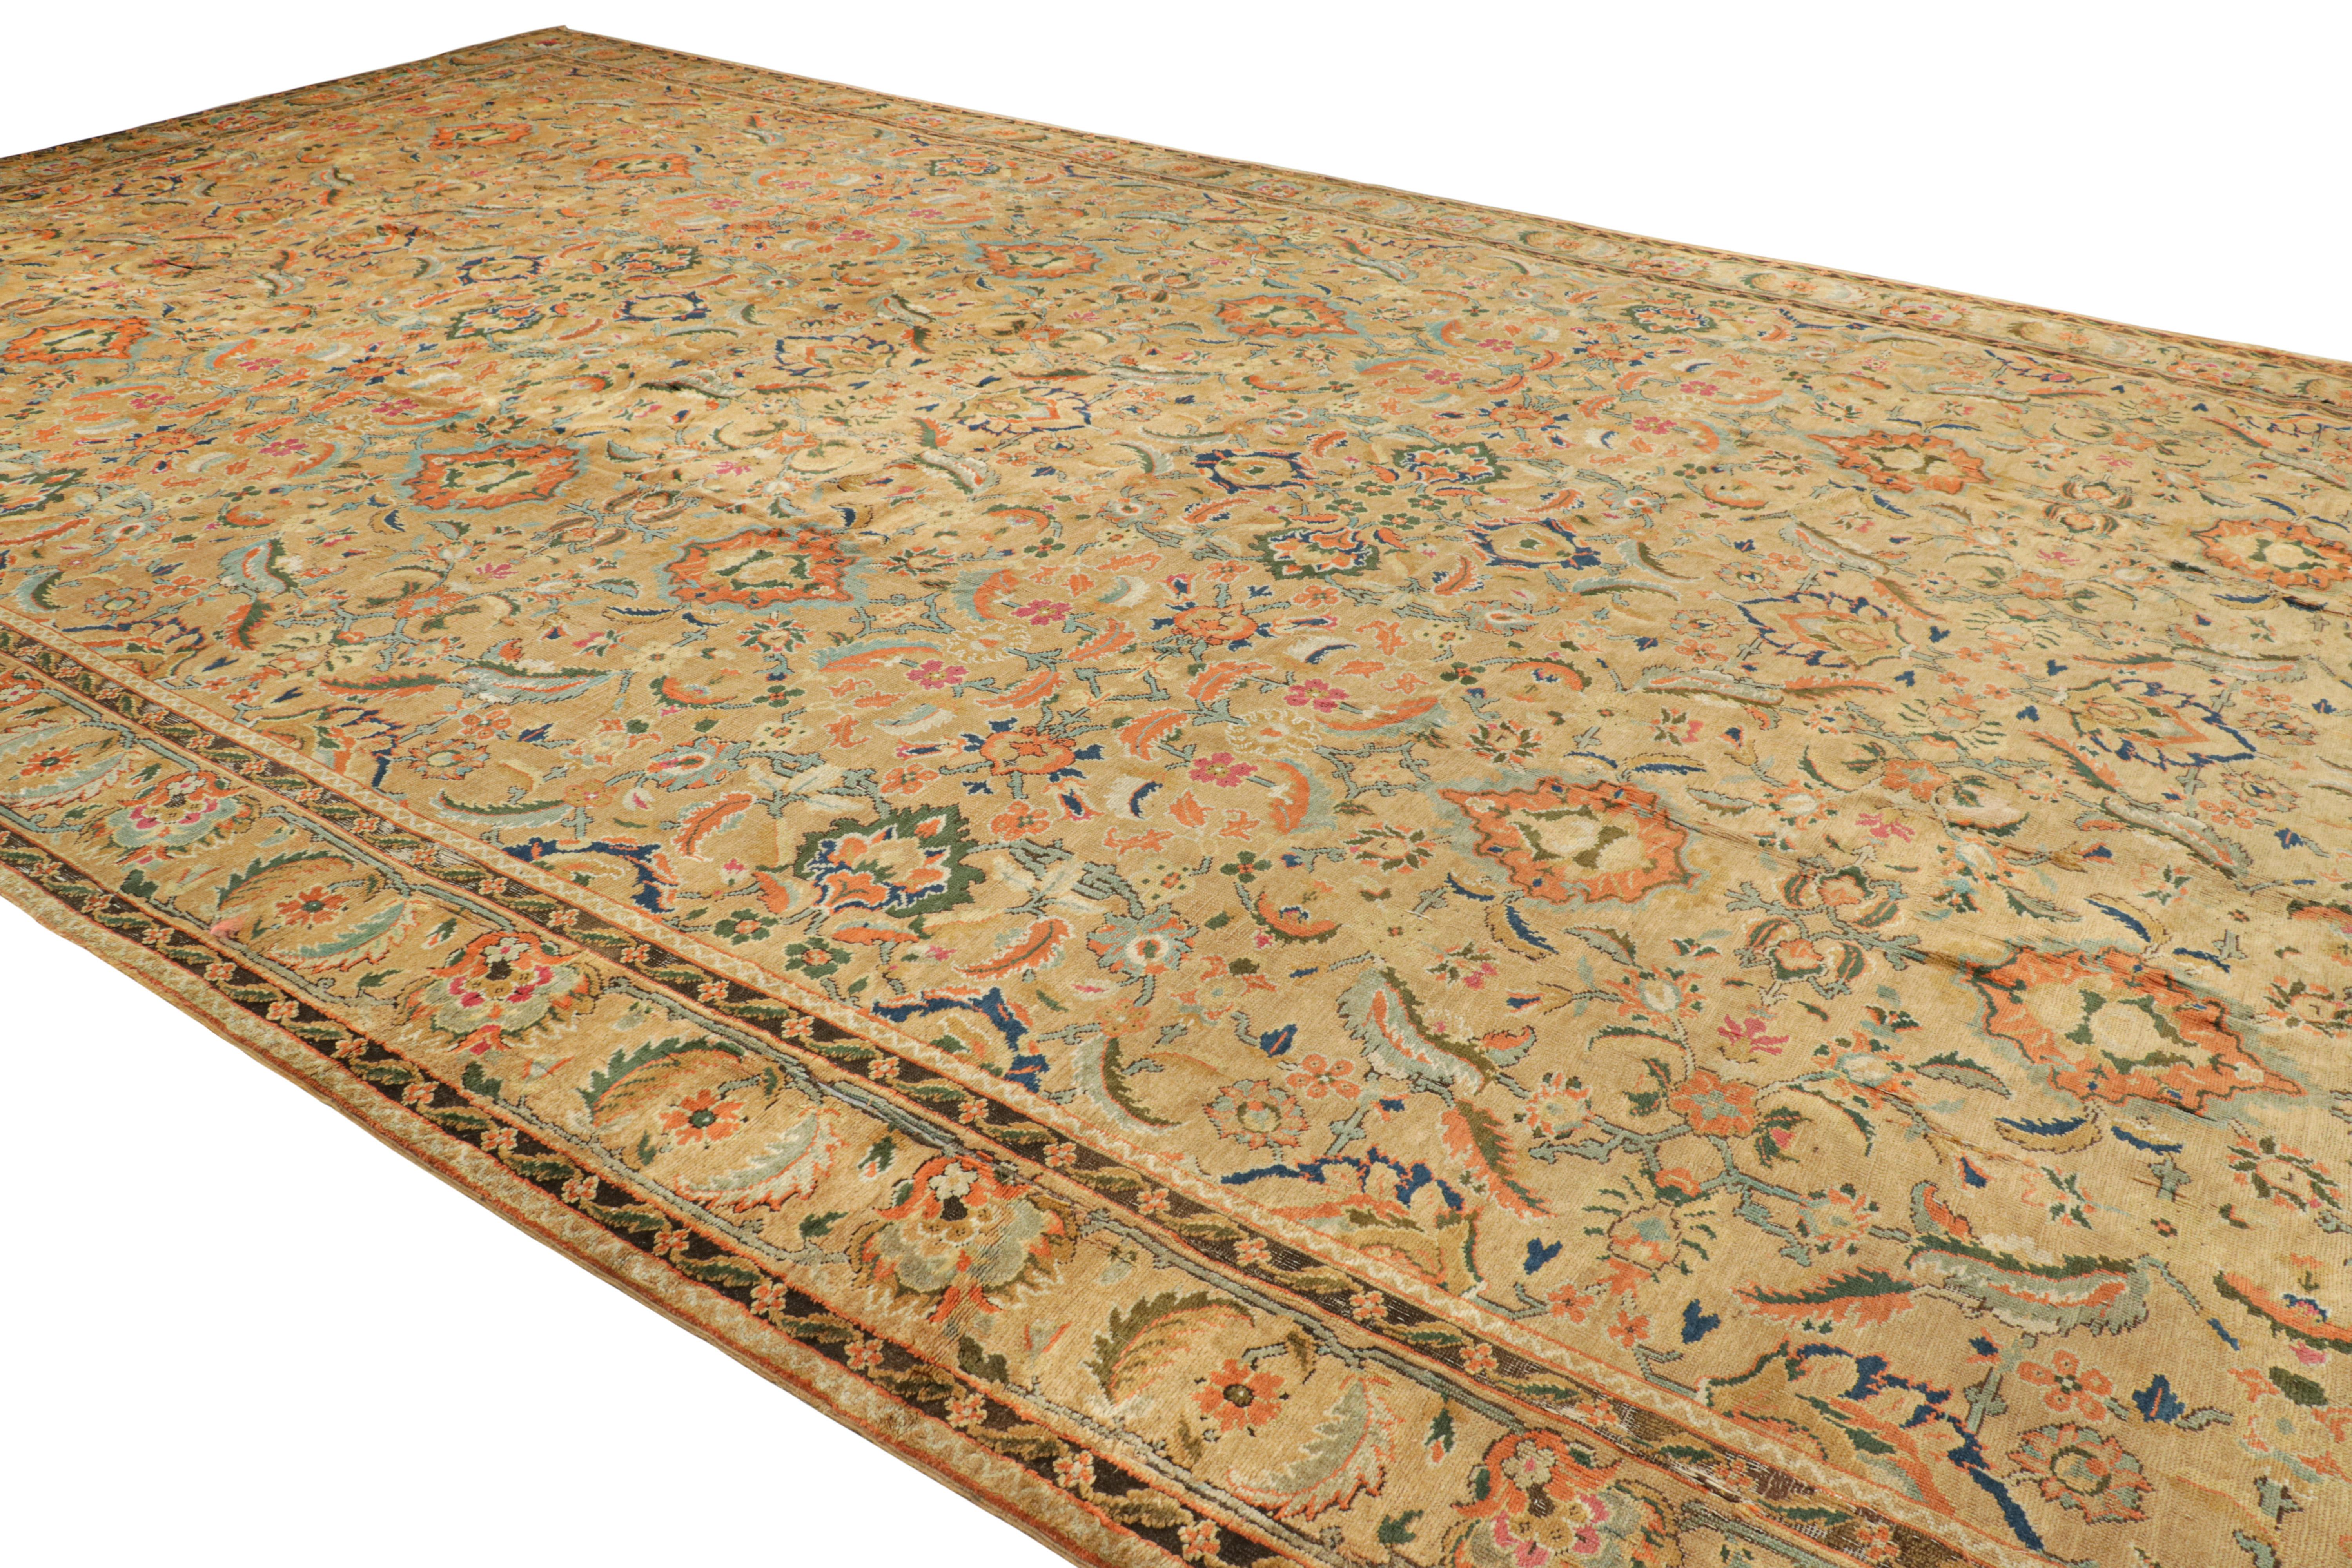 Hand-Knotted Oversized Antique Axminster Rug in Camel with Floral Patterns For Sale